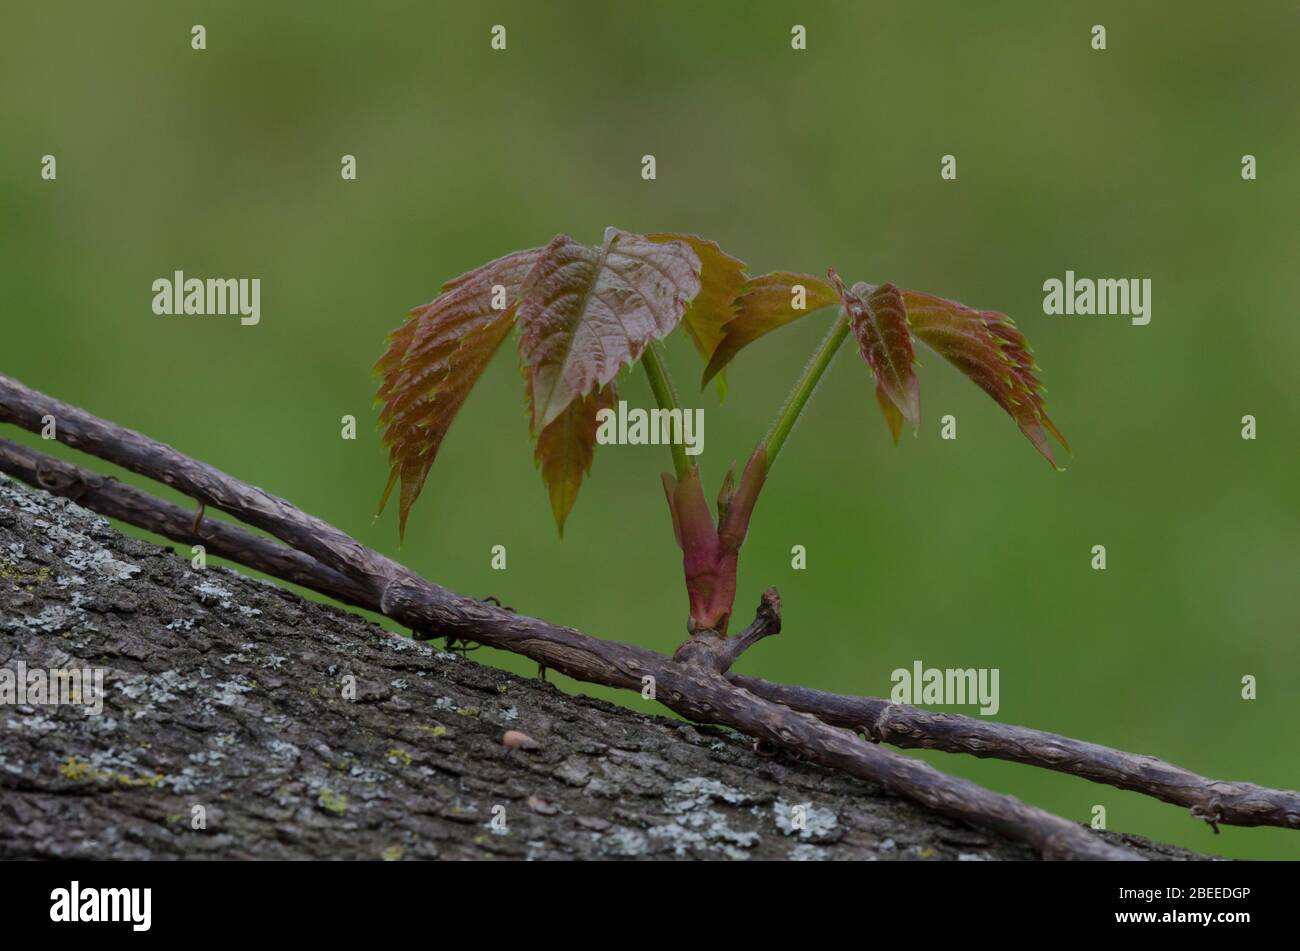 Virginia Creeper, Parthenocissus quinquefolia, leaves emerging in spring and growing up Eastern Redbud, Cercis canadensis, branch Stock Photo